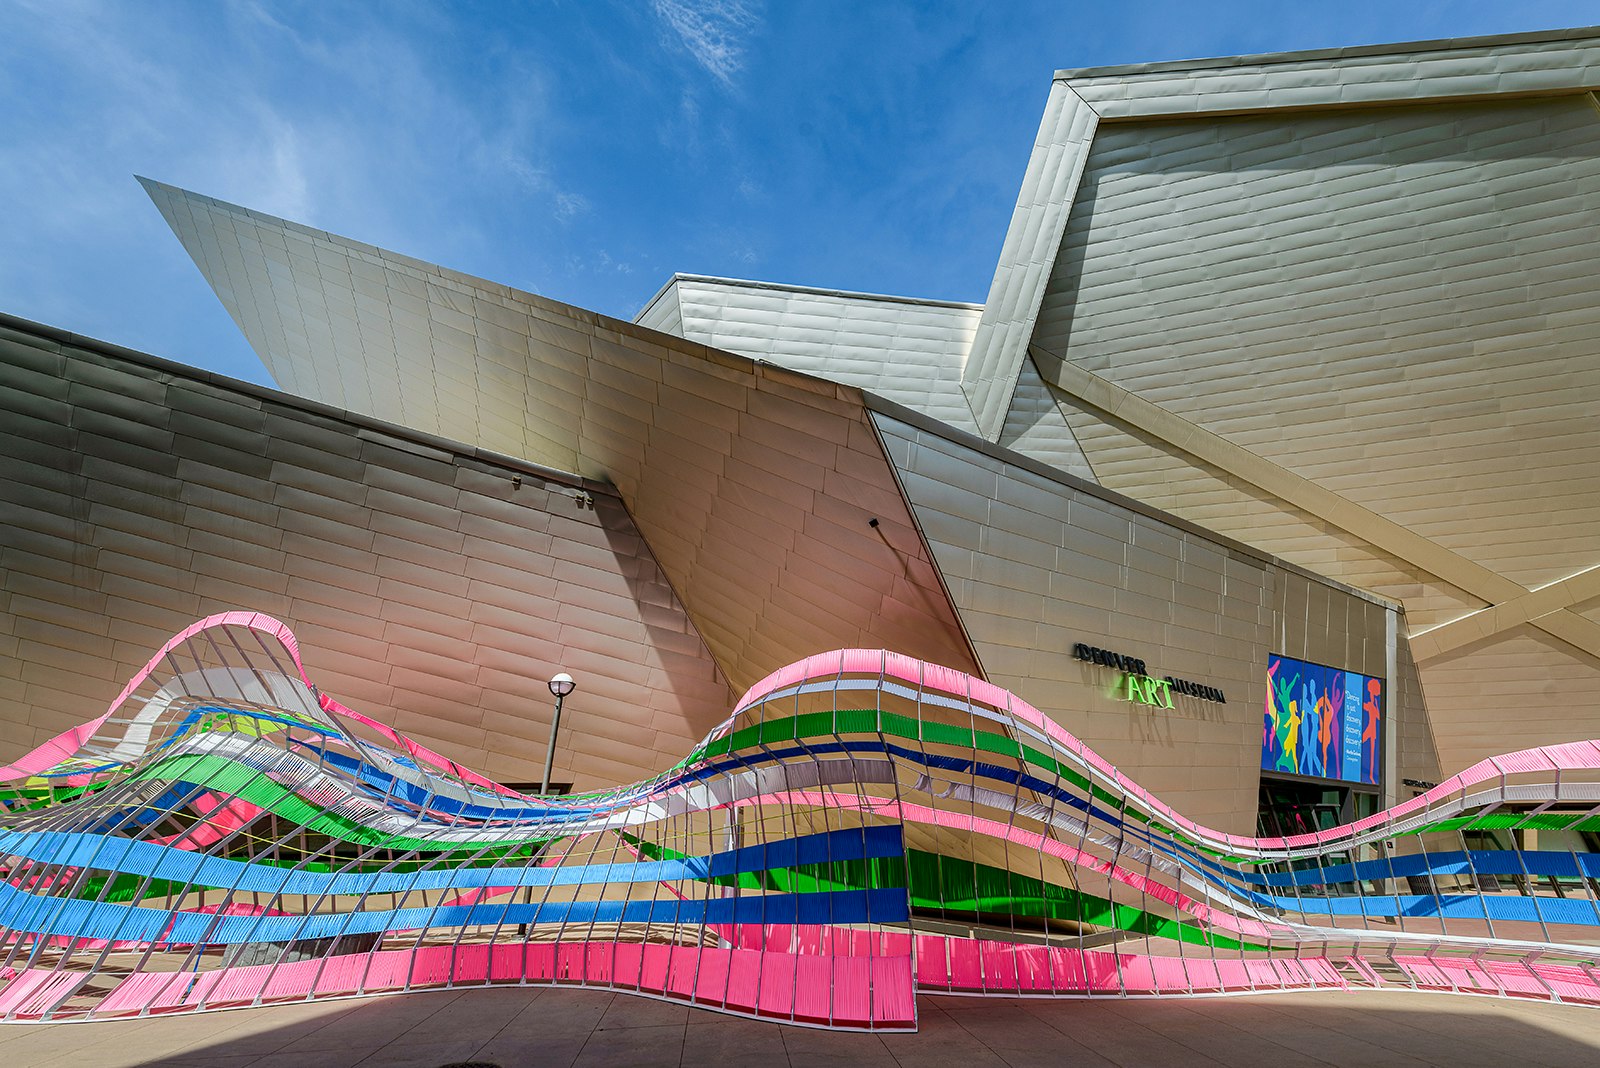 A wavy, multicolored art installation sits in front of the Denver Art Museum, which is characterized by its metal, geometric architecture. Denver, Colorado.